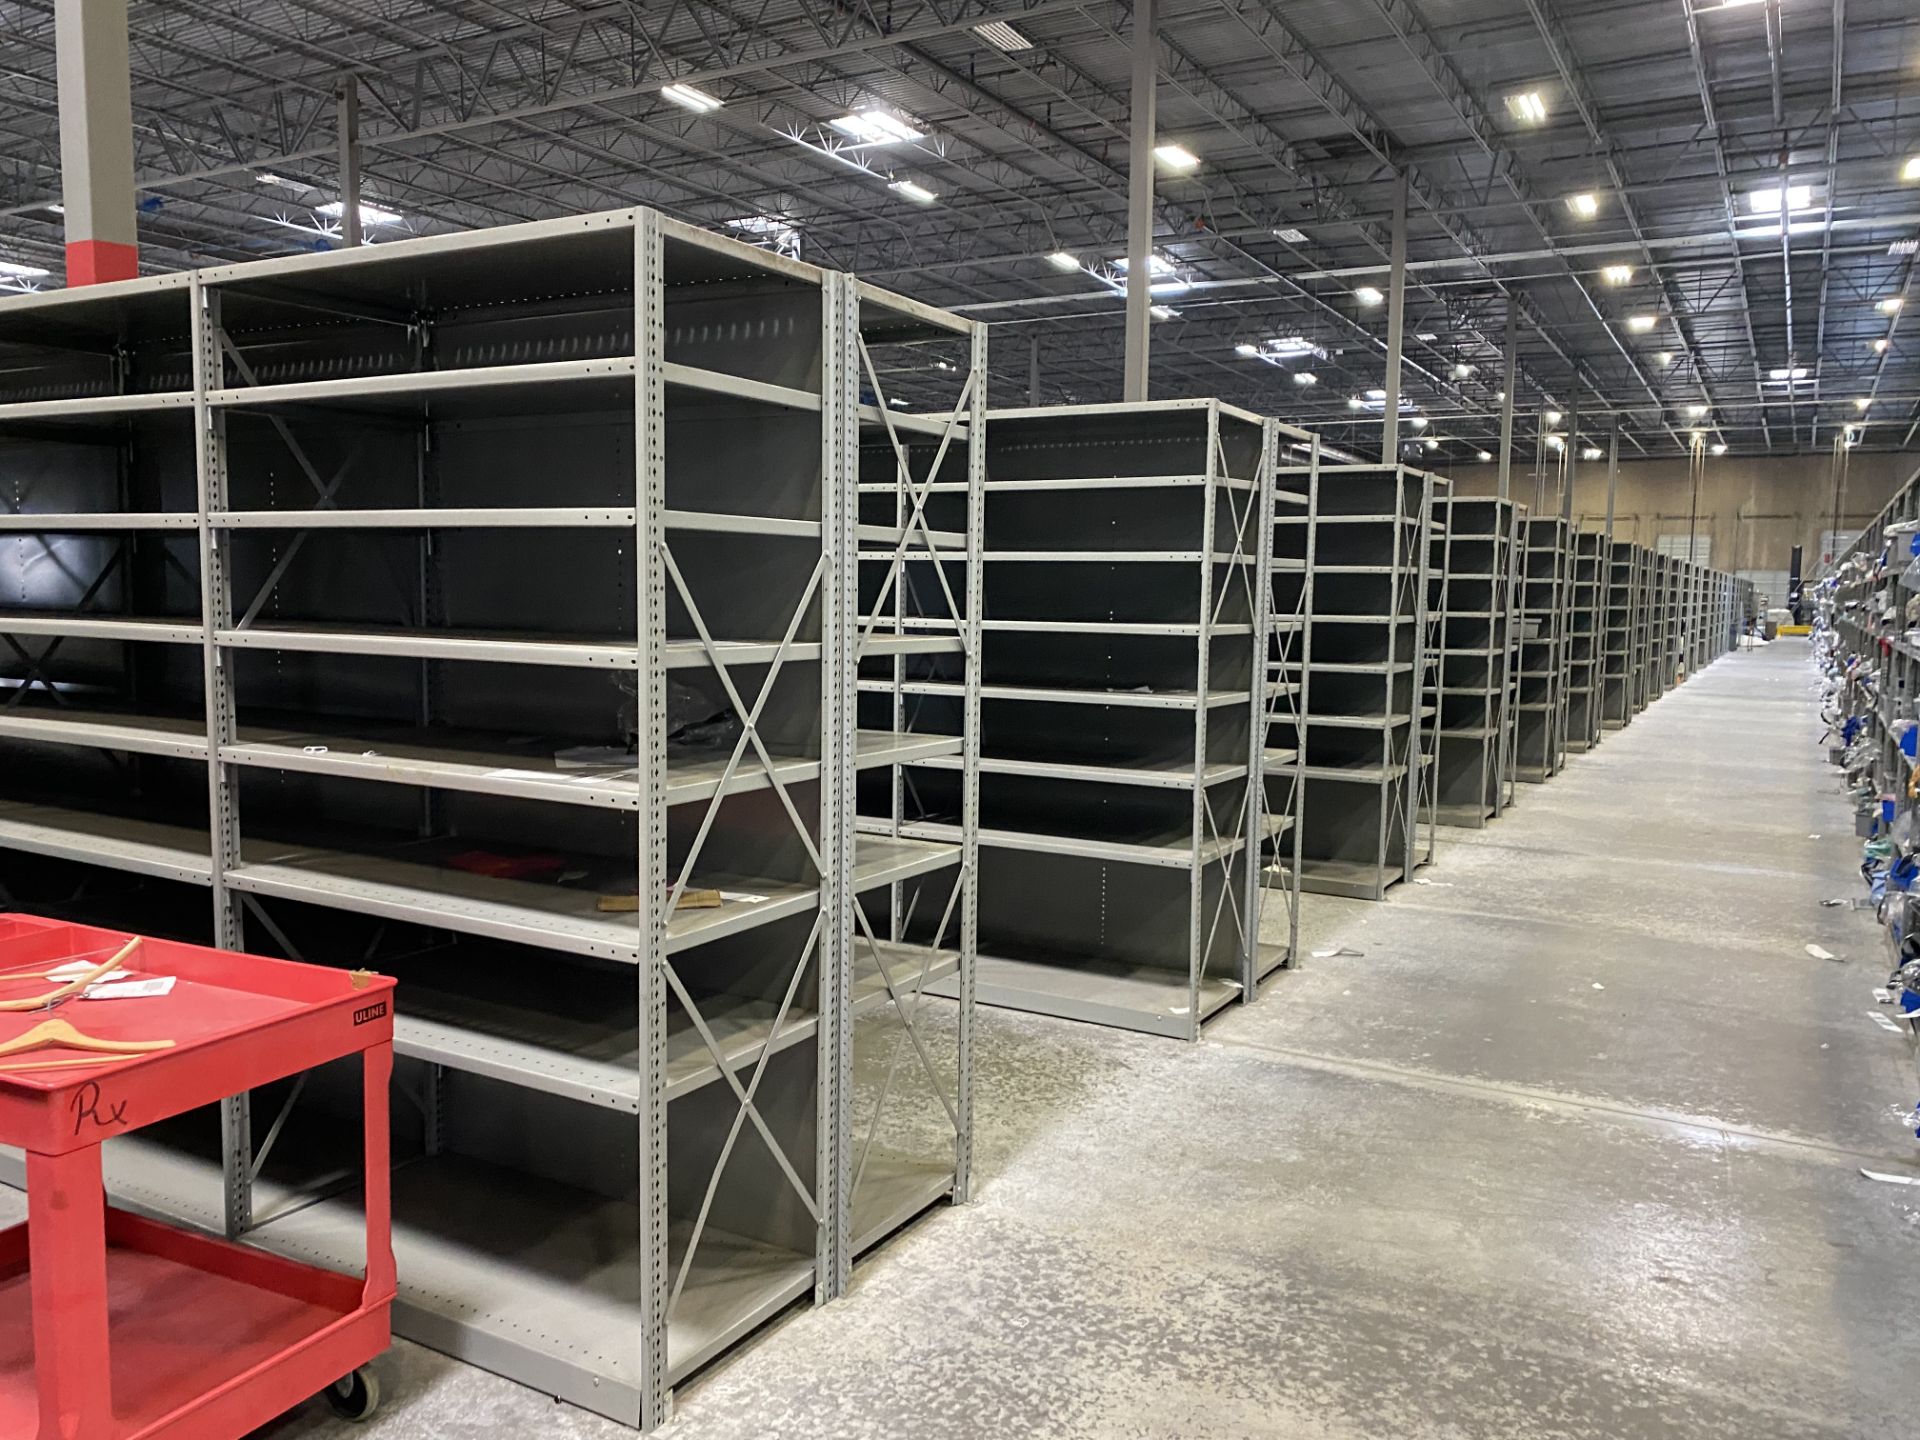 20 SECTIONS OF METAL CLOSED BACK SHELVING